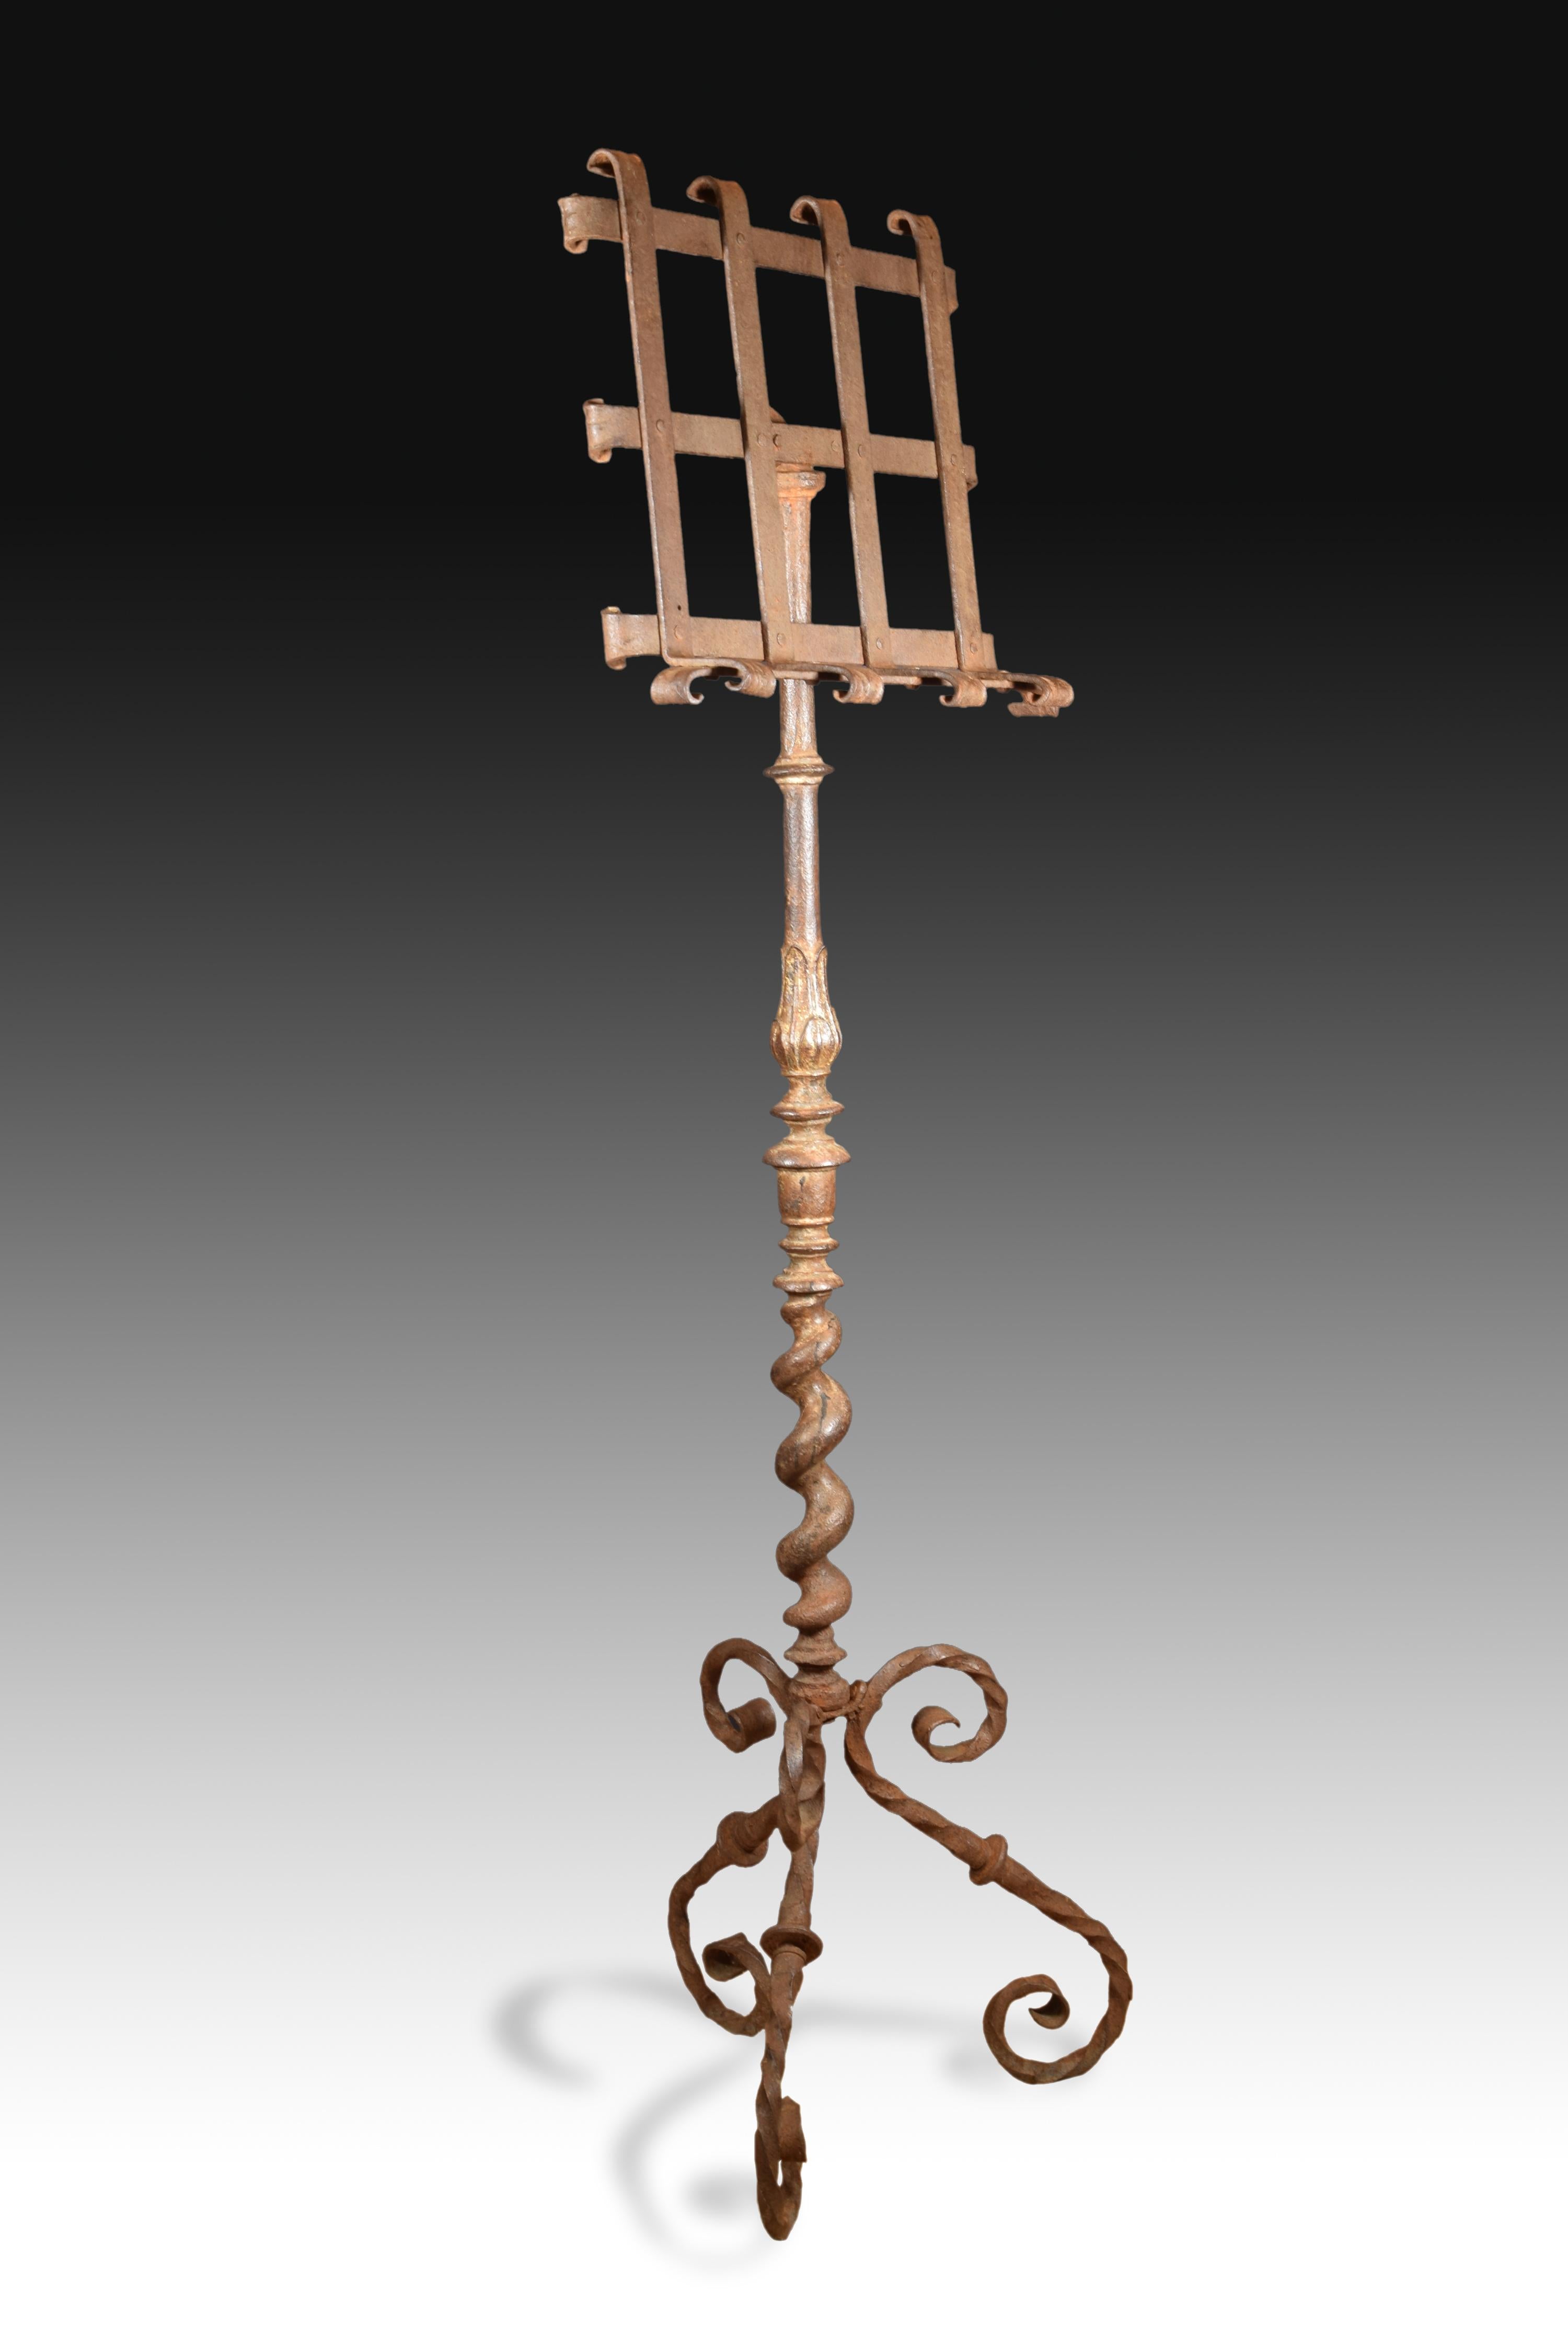 Lectern. Wrought iron. Baluster 17th century; 20th century rest.
Foot stand made of wrought iron with three twisted legs in the form of 